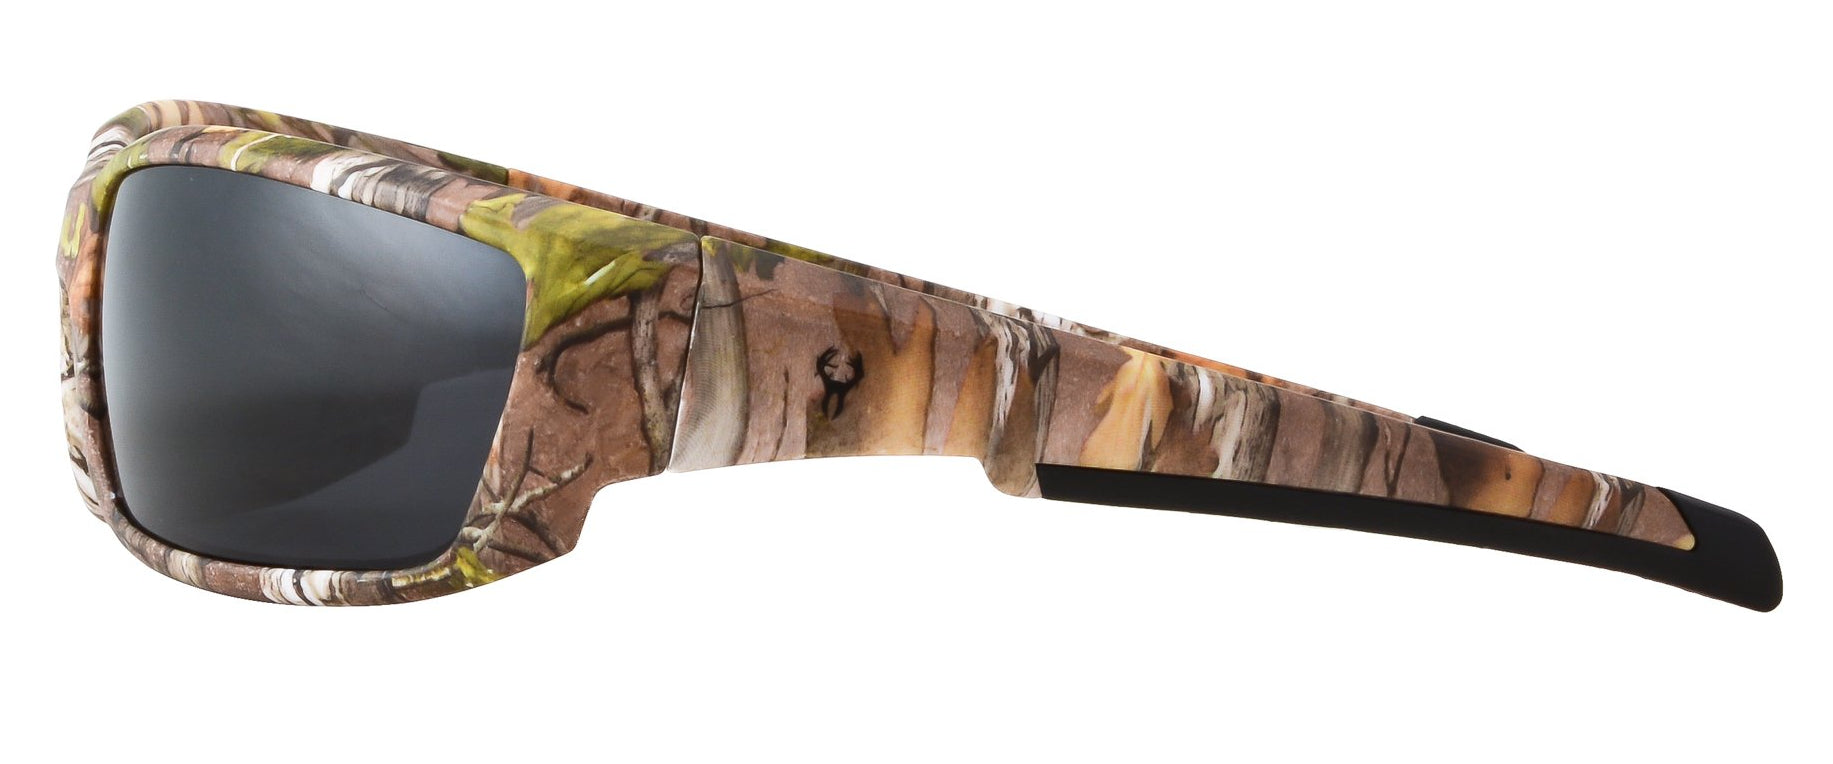 Second image: Hornz Brown Forest Camouflage Polarized Sunglasses for Men Full Frame Strong Arms & Free Matching Microfiber Pouch – Brown Camo Frame - Smoke Lens